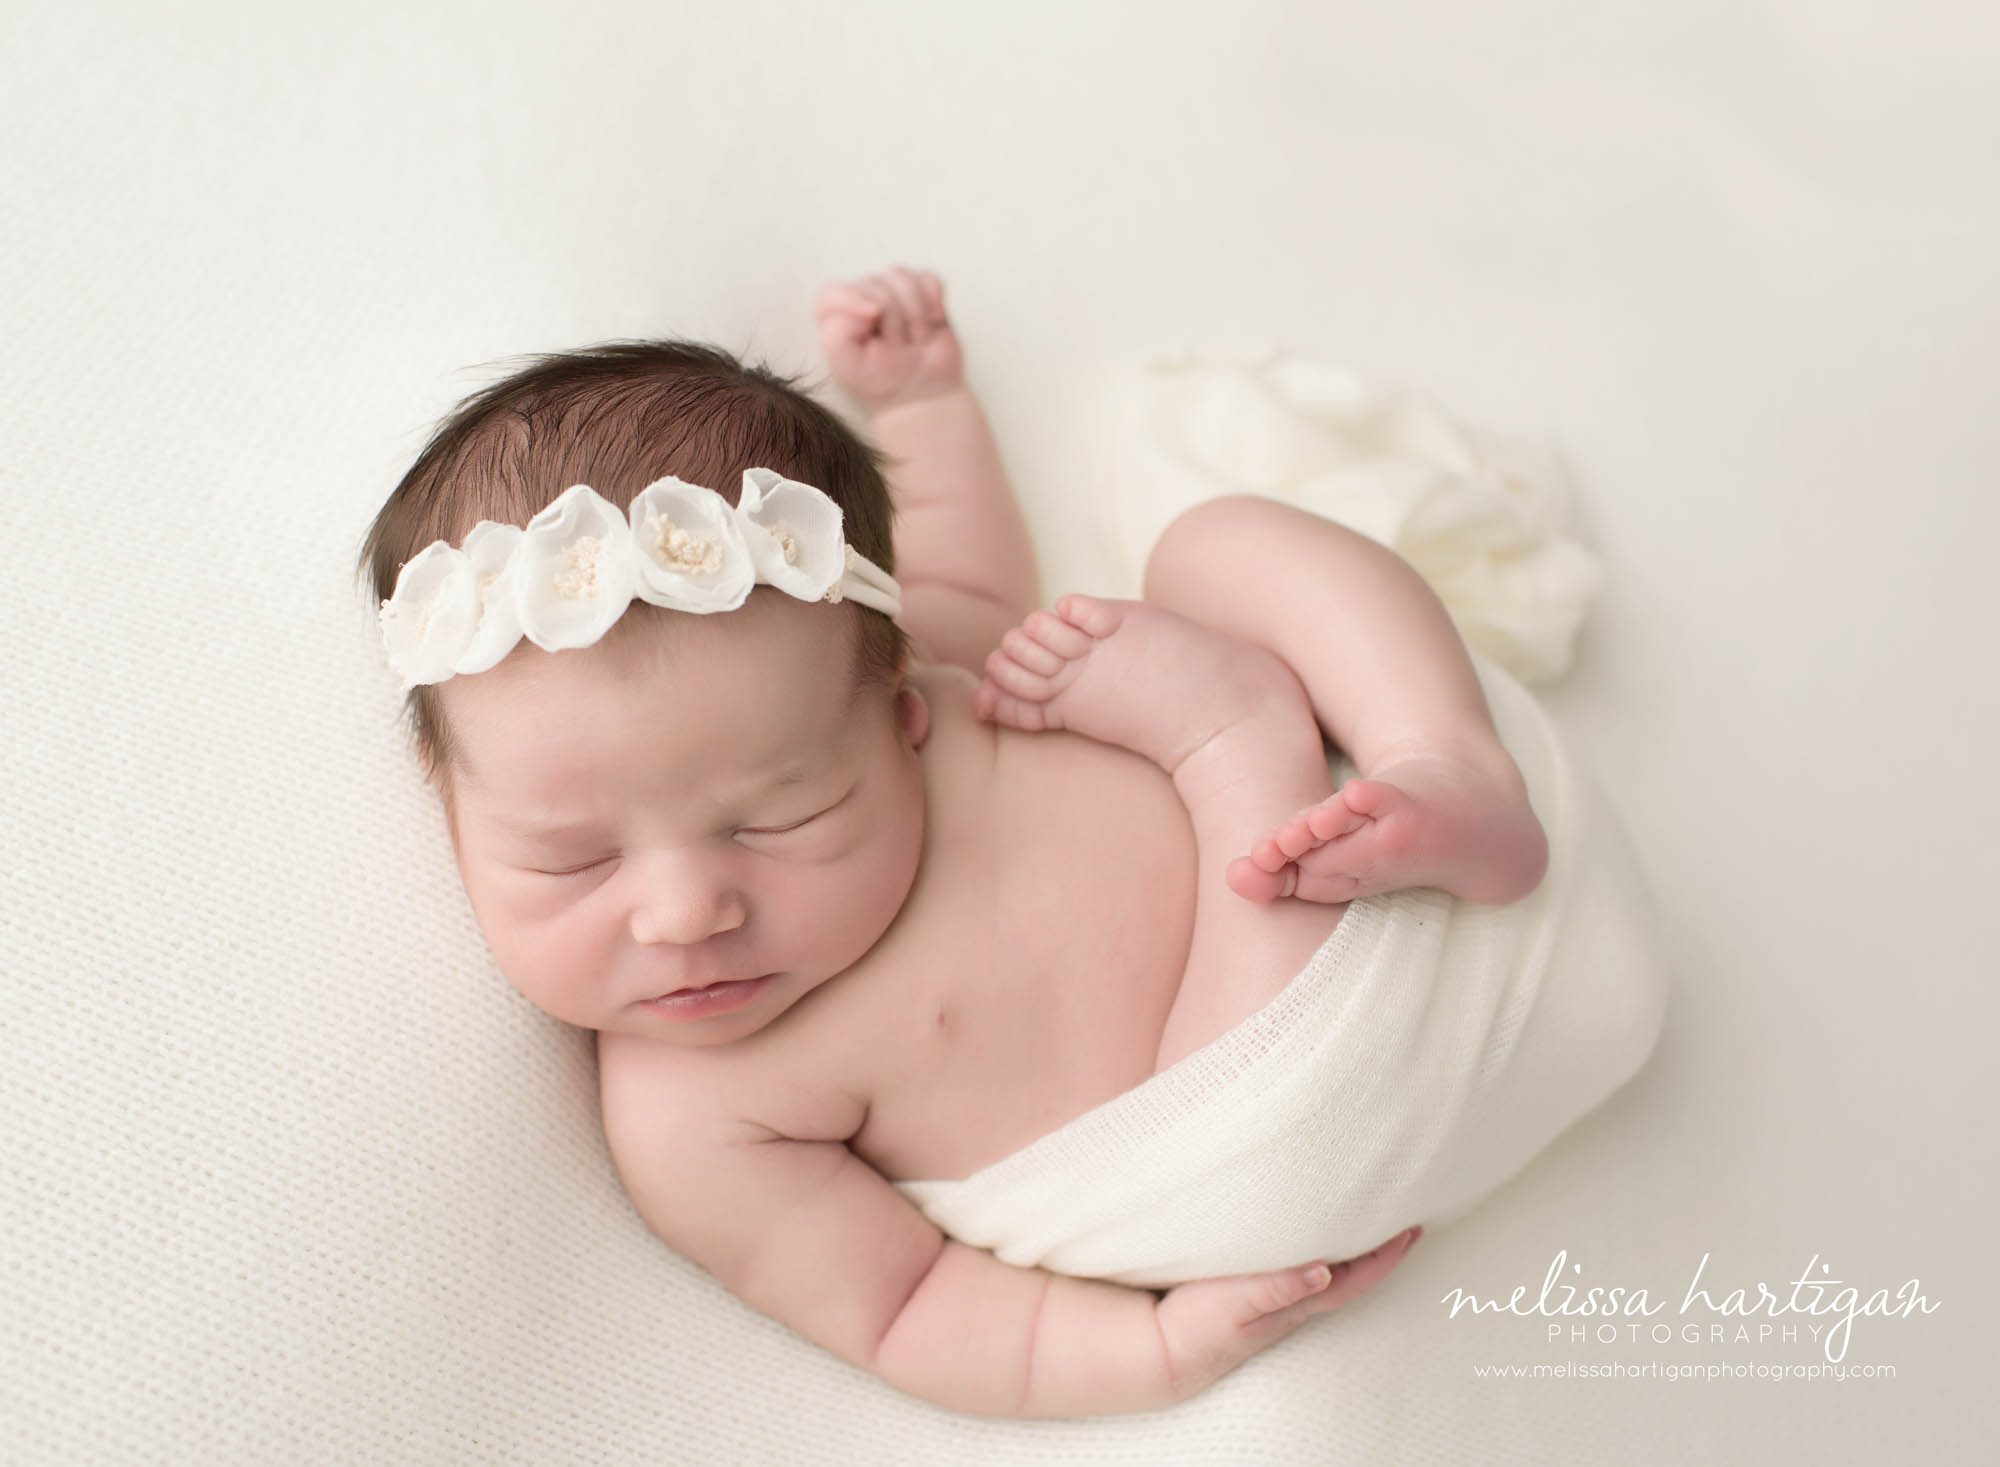 Melissa Hartigan Photography CT Newborn Photographer Emerson CT Newborn Session baby girl sleeping with tushy wrapped in white blanket wearing white floral headband with arms and feet untucked